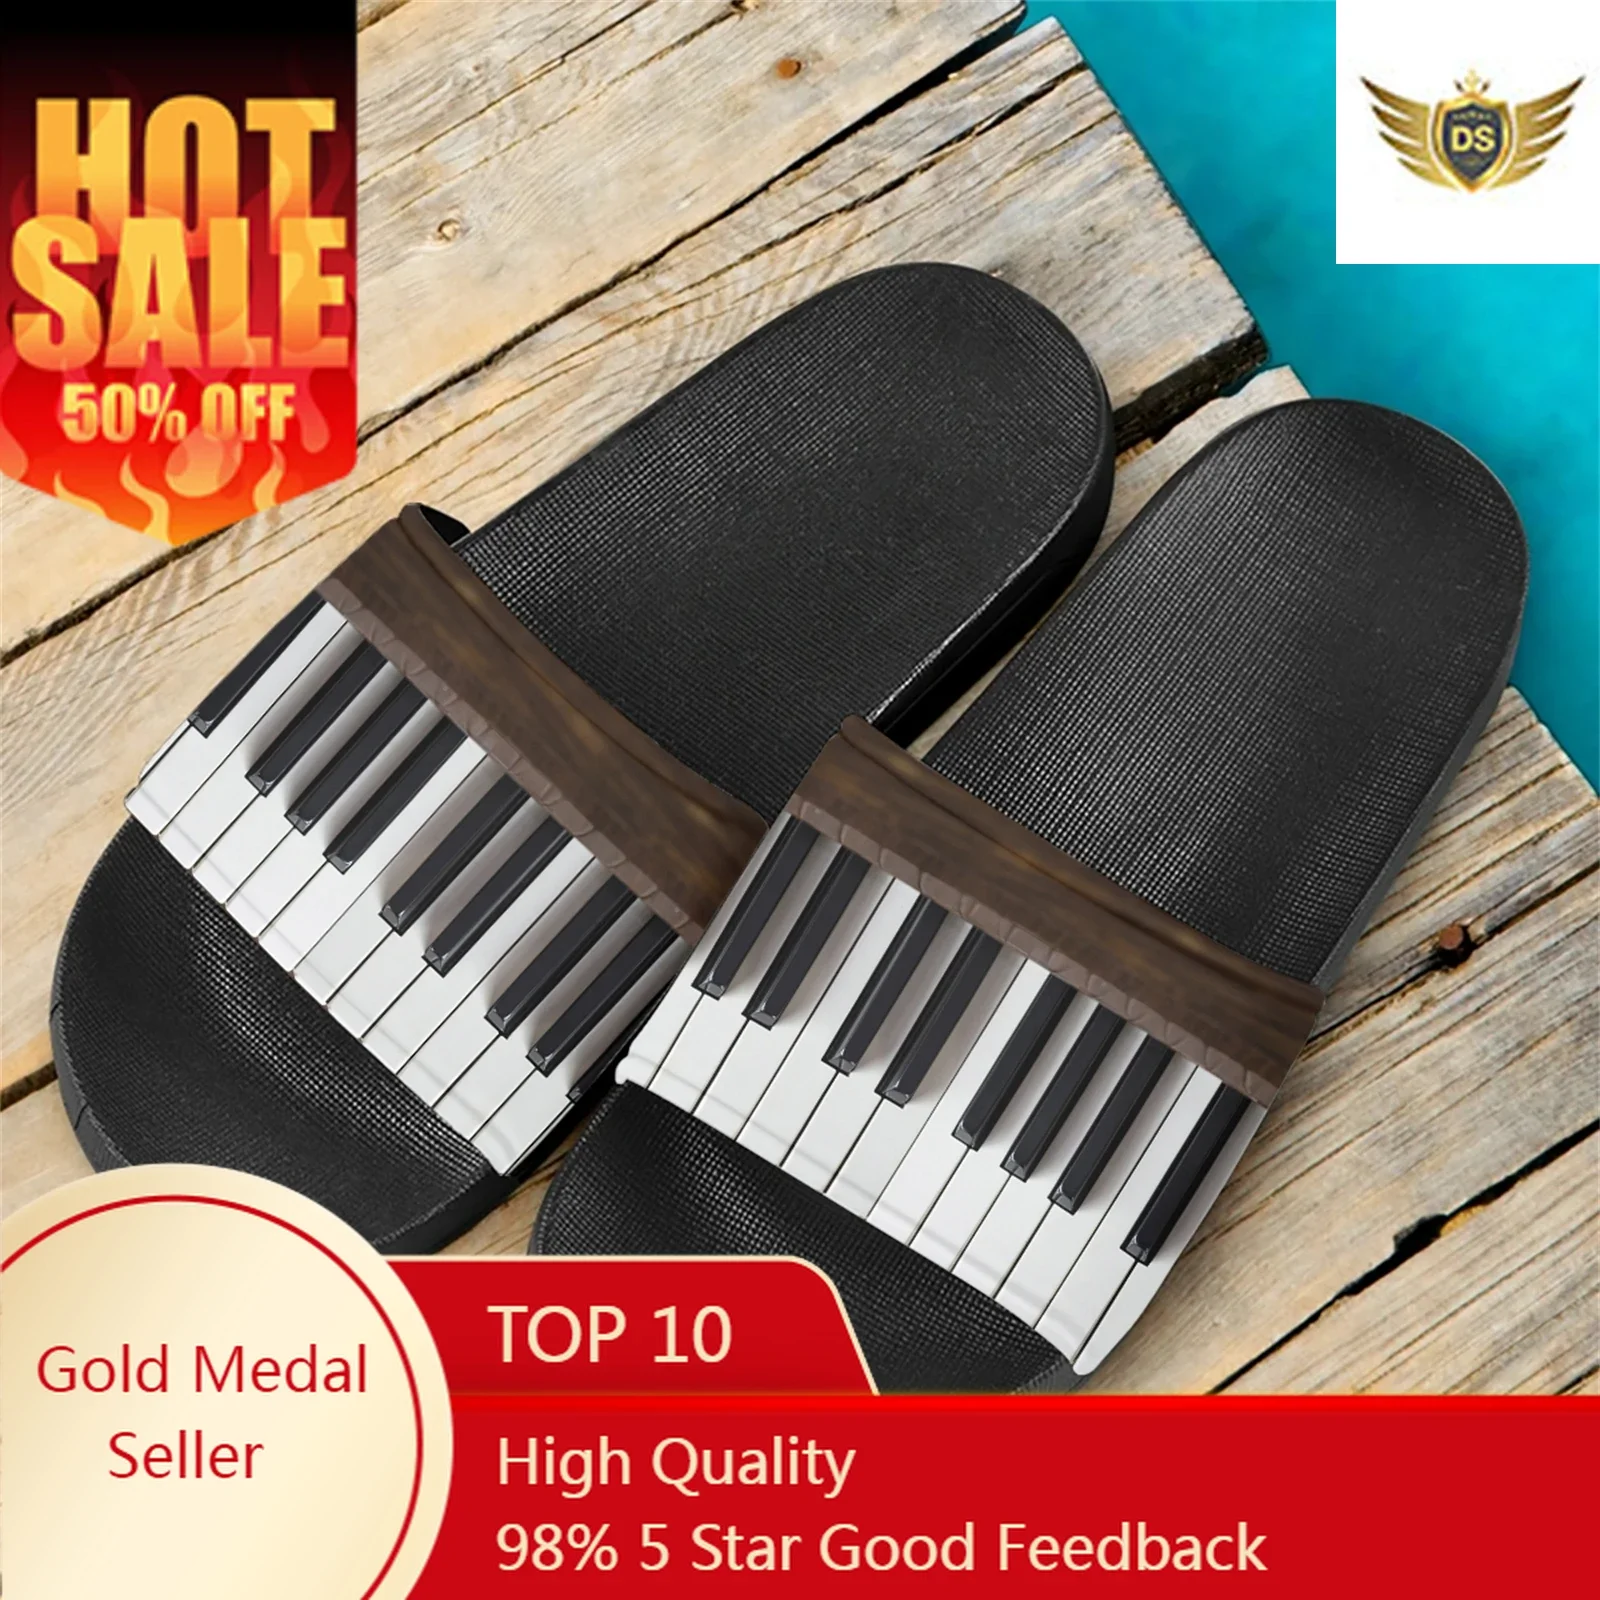 

New Piano Key Design Girls Slippers Music Theme Art Student Dormitory Home Fashion Sandals Soft Sole Outdoor Flat Shoes